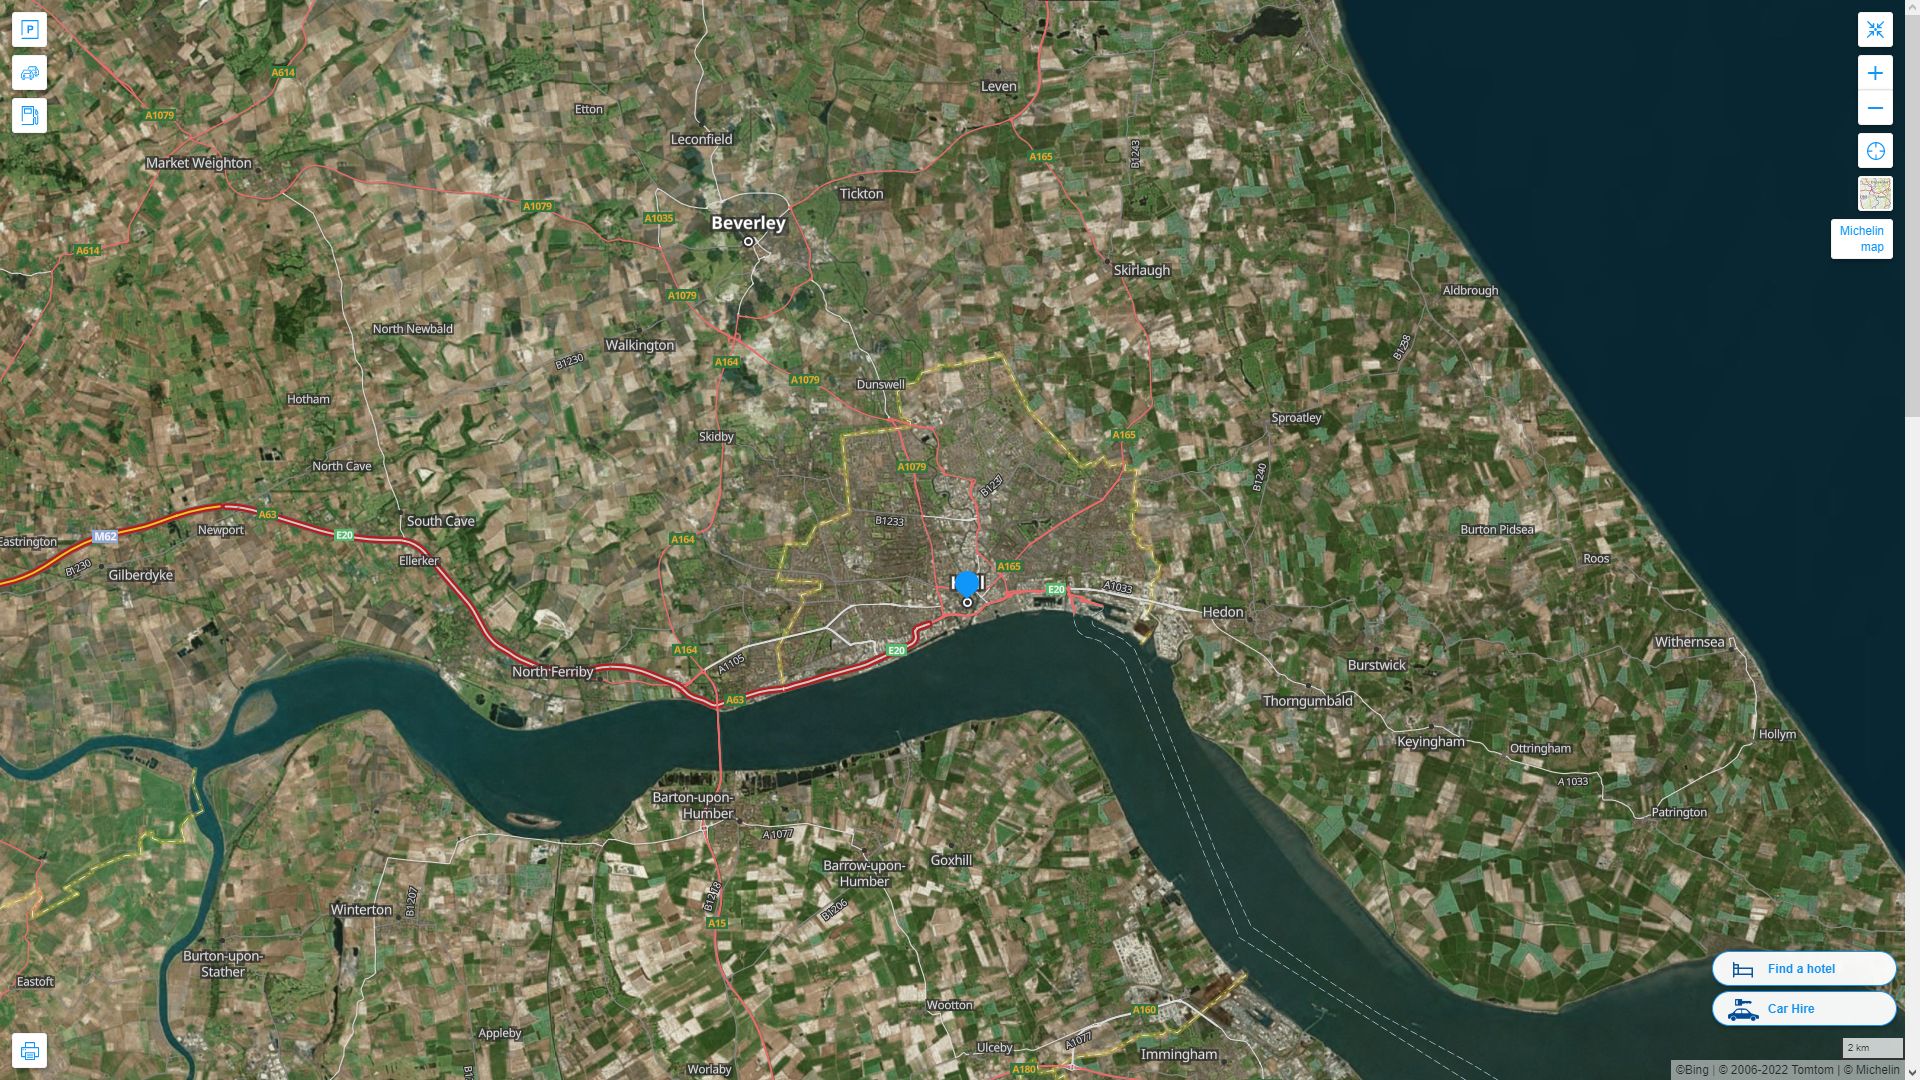 Kingston Upon Hull Highway and Road Map with Satellite View